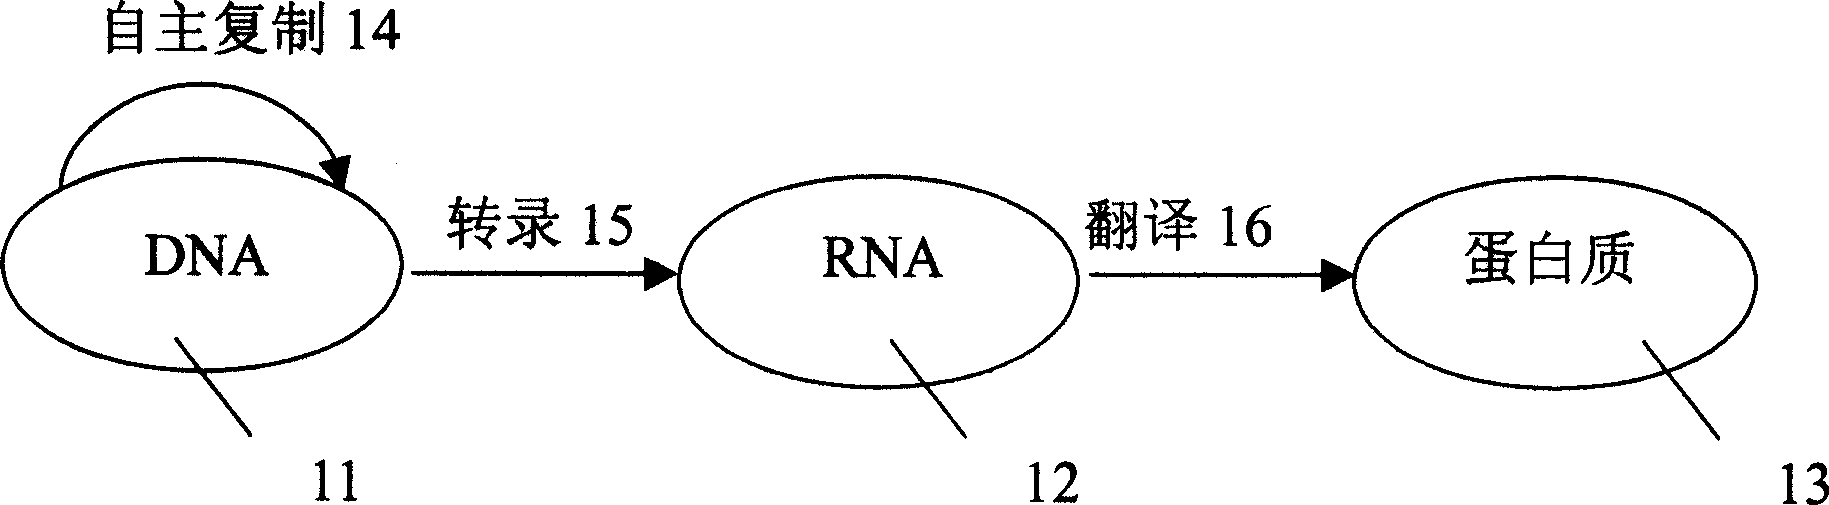 High-performance biological characteristic authentication system